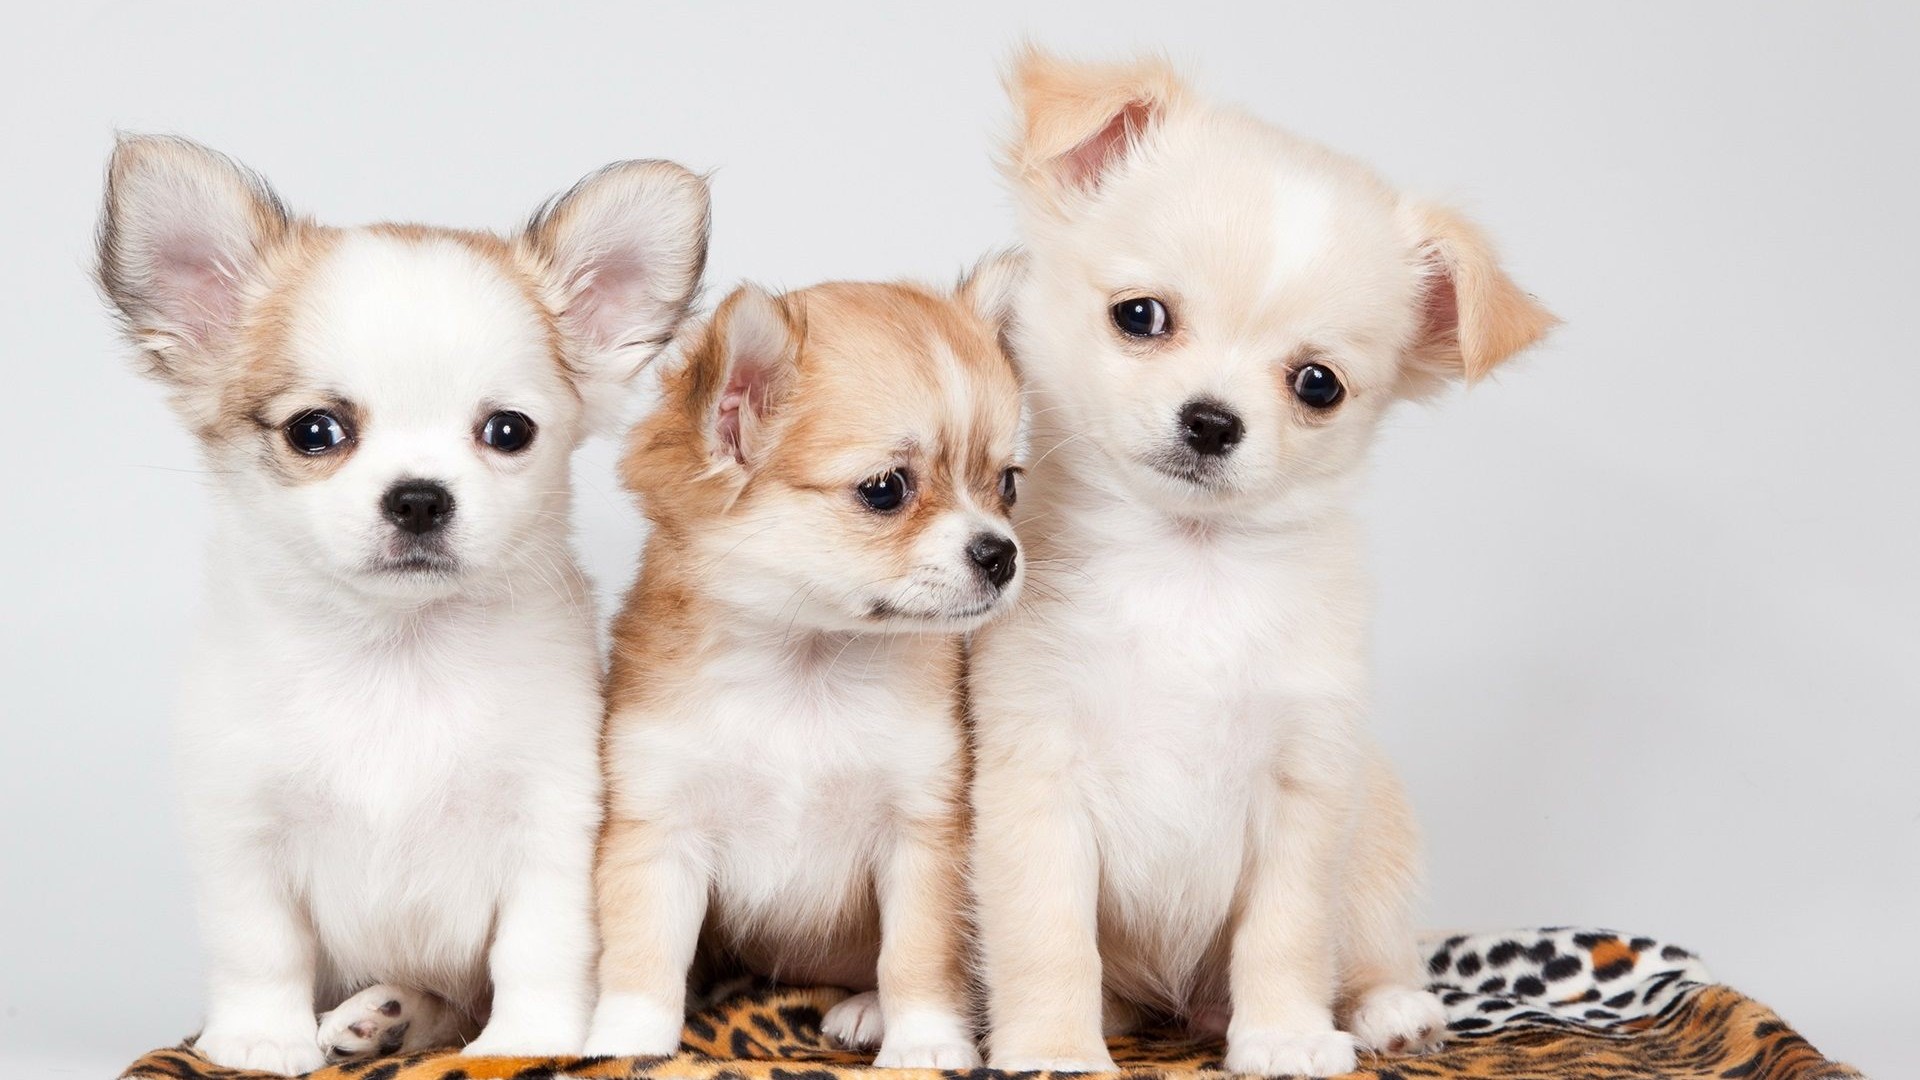 Wallpapers Cute Puppies Pictures 1920x1080